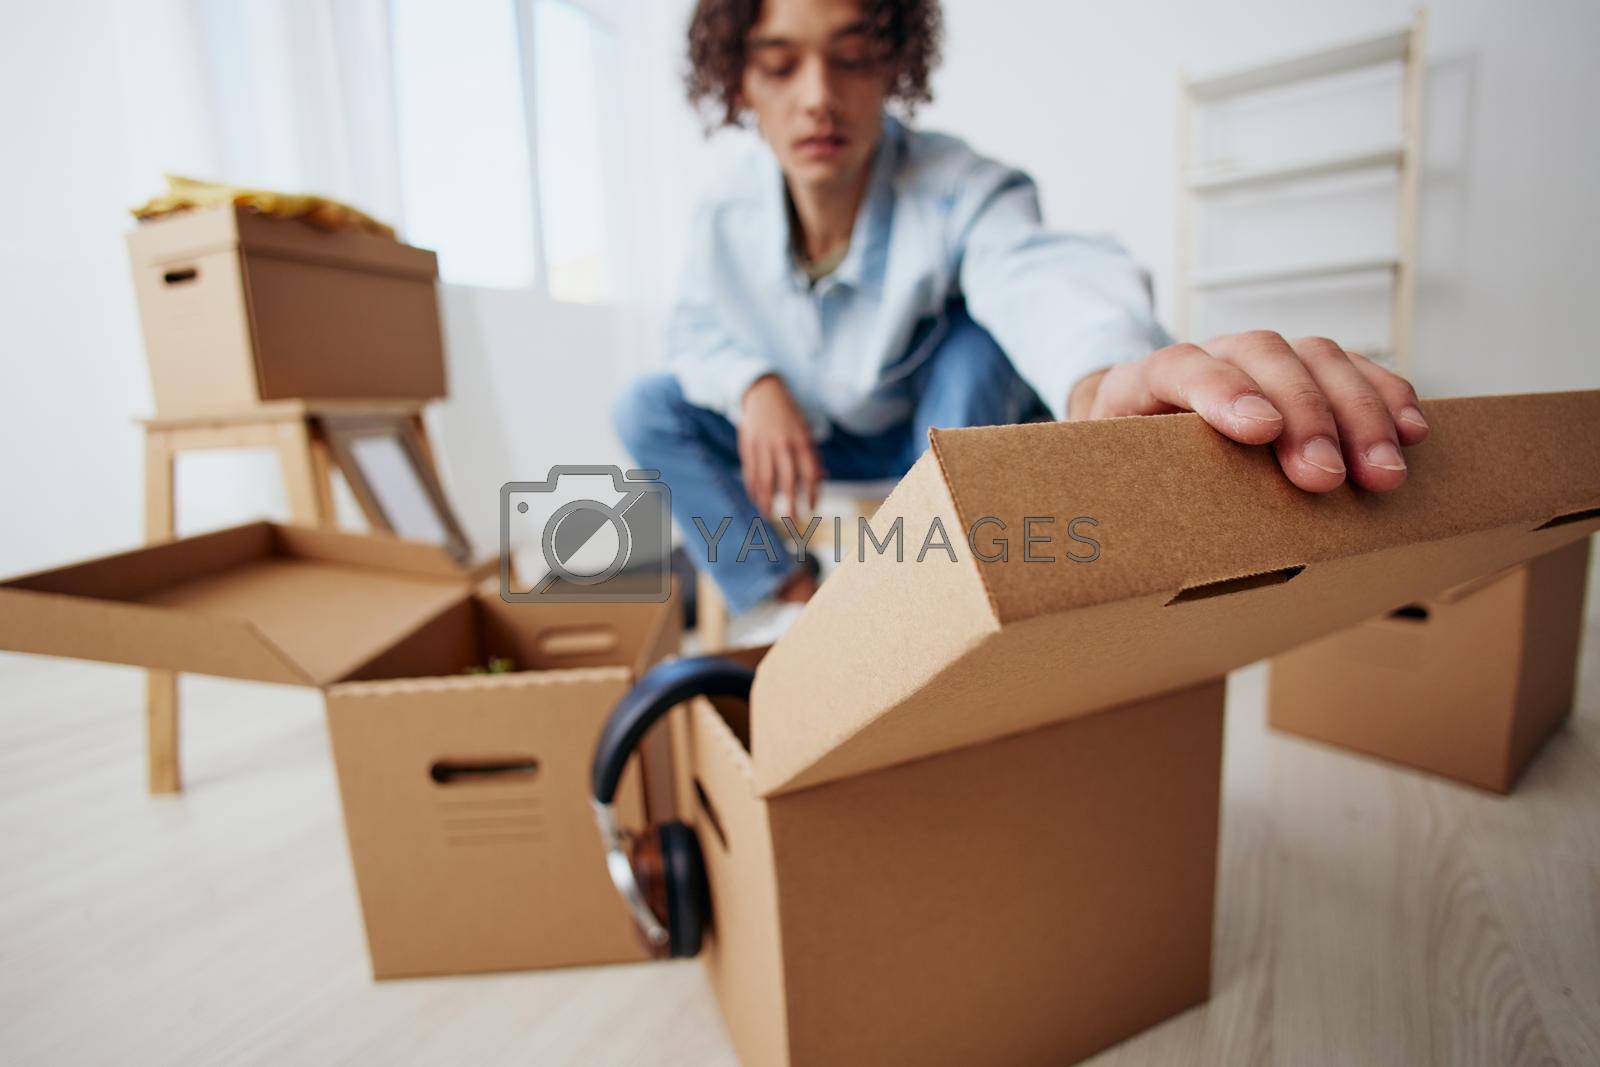 Royalty free image of guy with curly hair sitting on a chair with boxes moving interior by SHOTPRIME